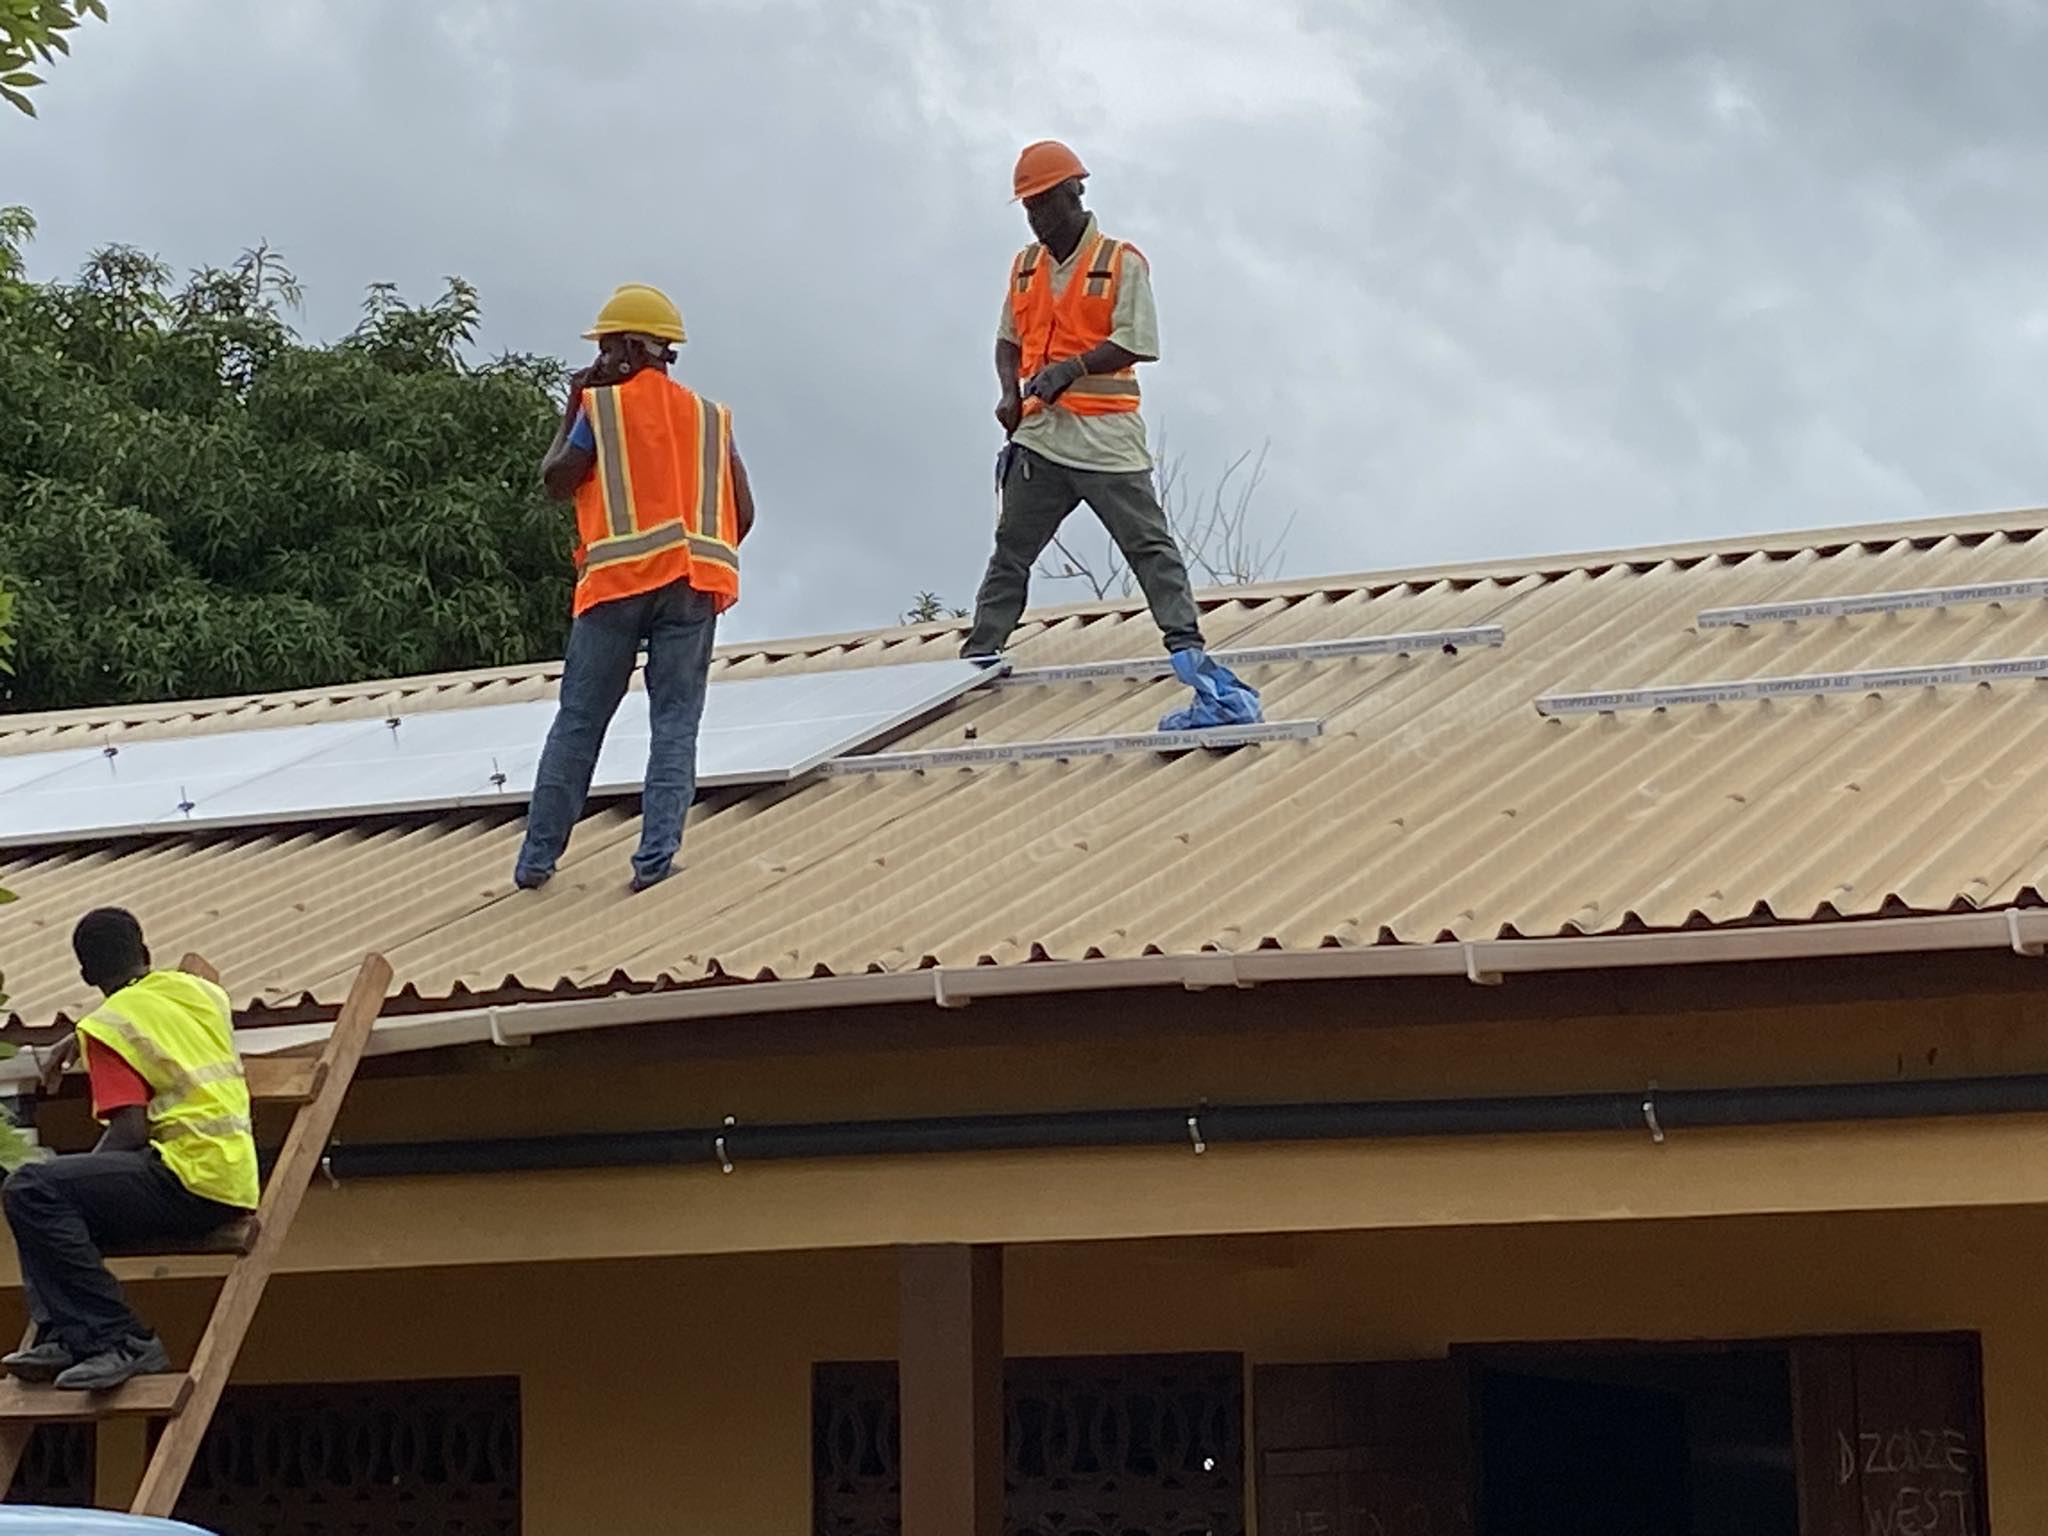 the roof of the classrooms has 2 men installing solar panels while a third man stands at the top of the ladder